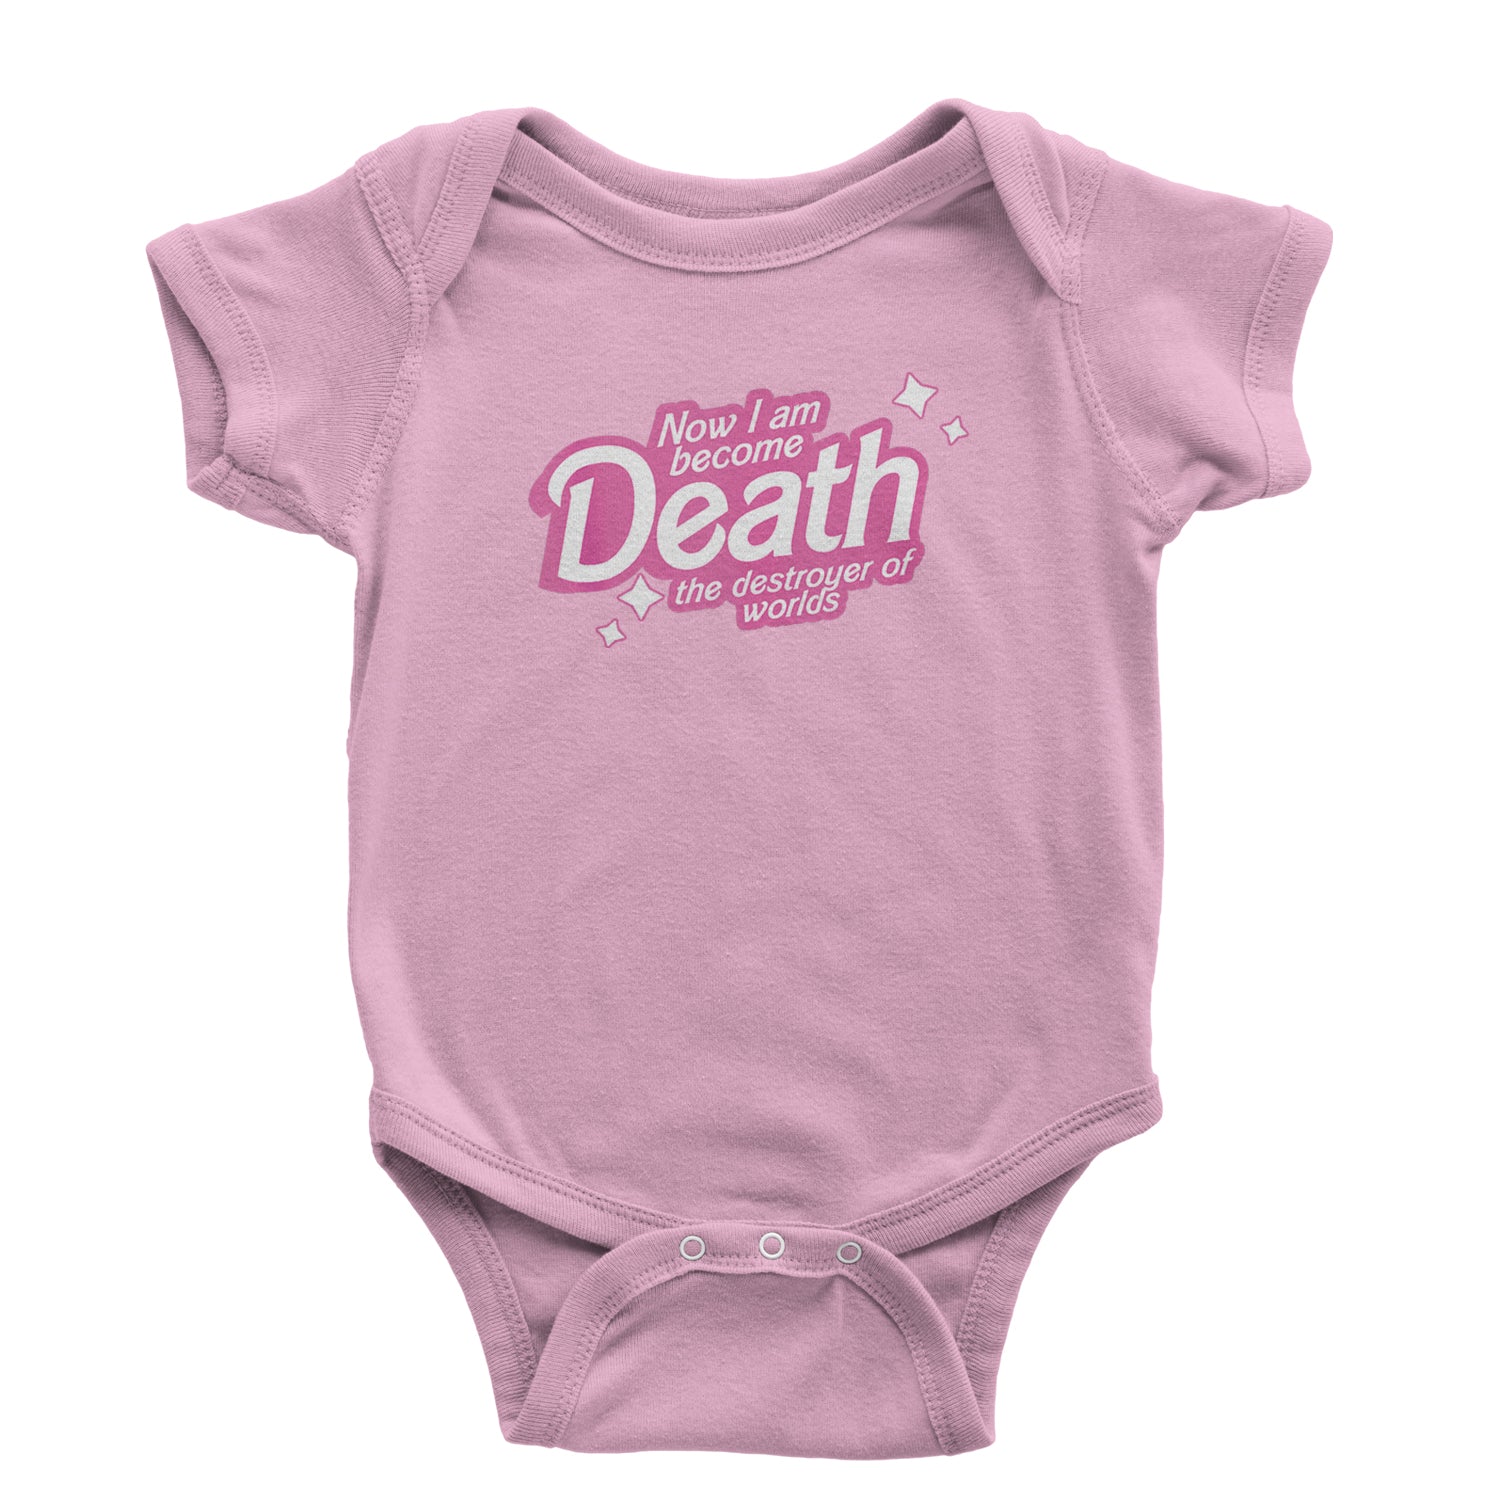 Now I am Become Death Barbenheimer Infant One-Piece Romper Bodysuit and Toddler T-shirt